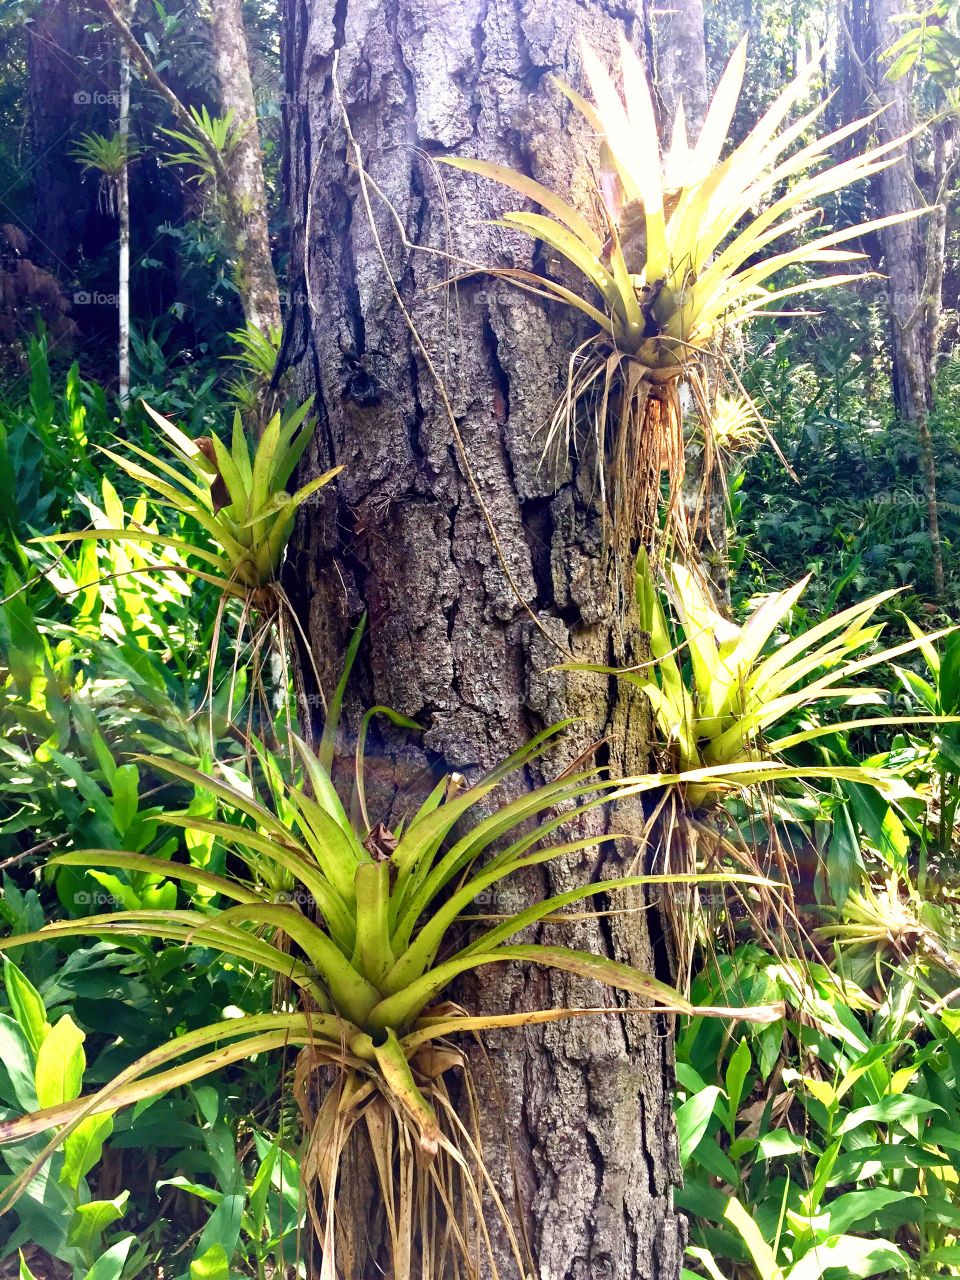 Air plants growing on tropical tree.